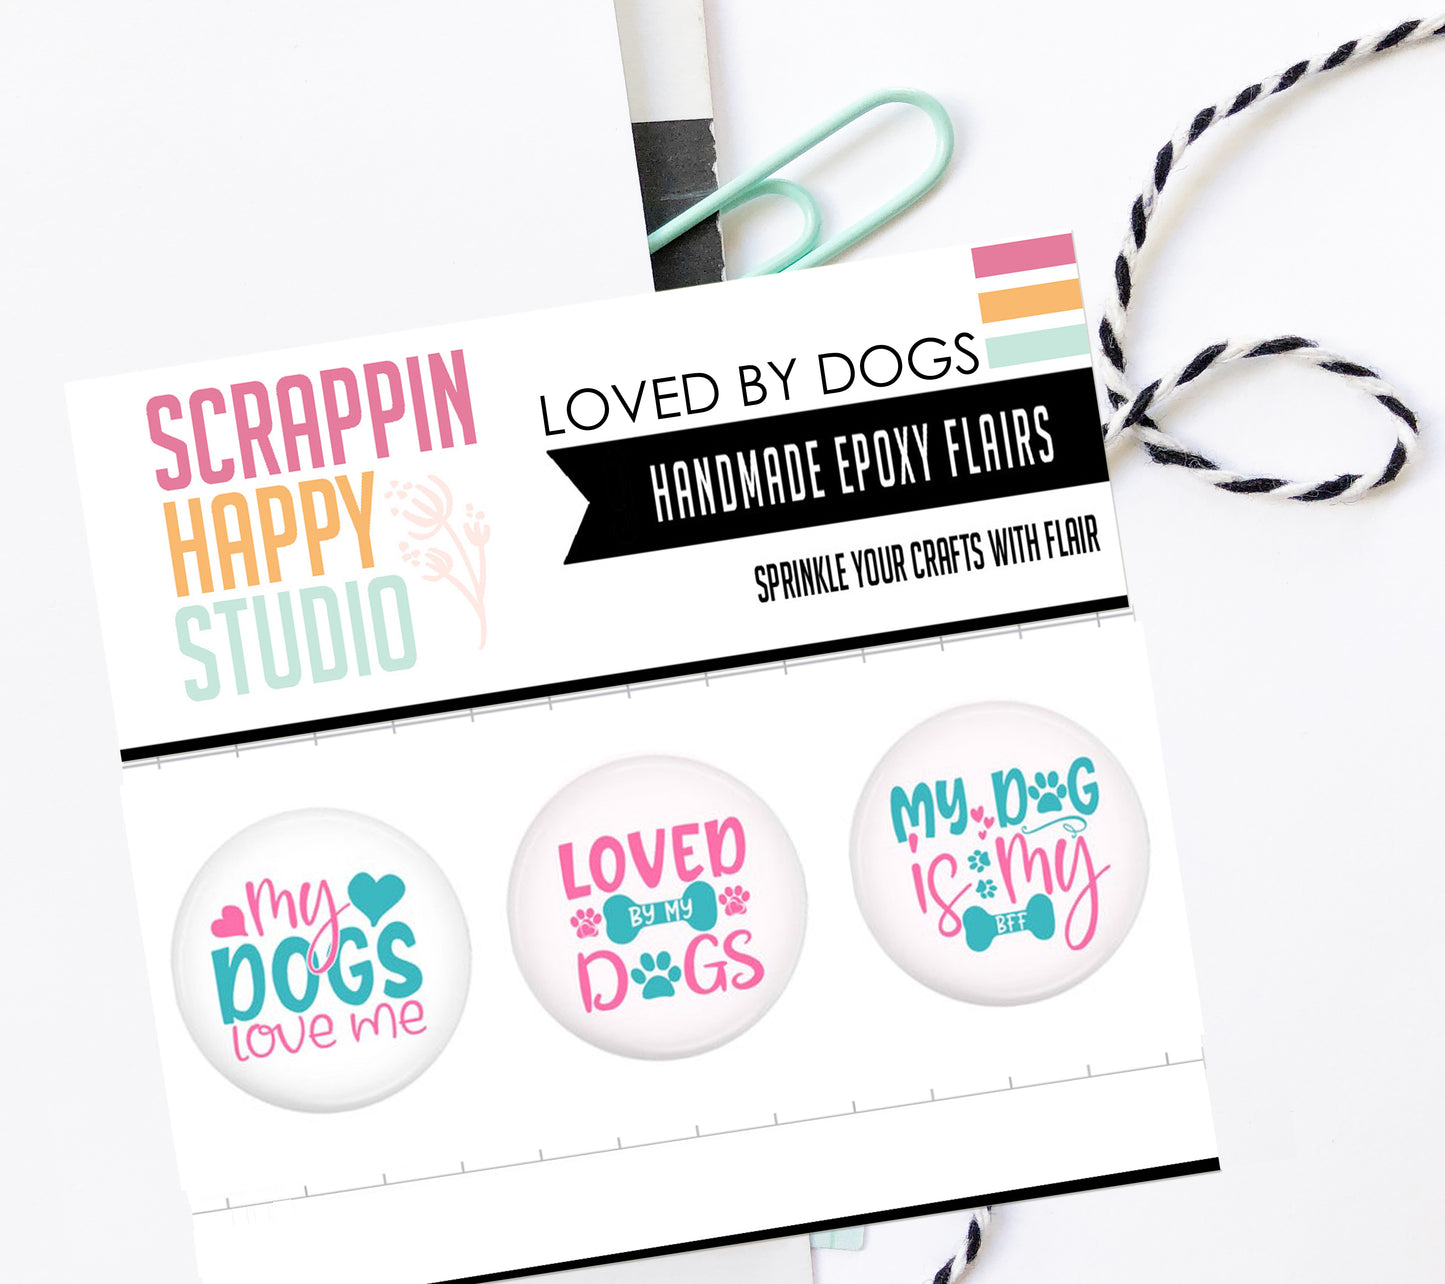 Loved By Dogs Epoxy Flair